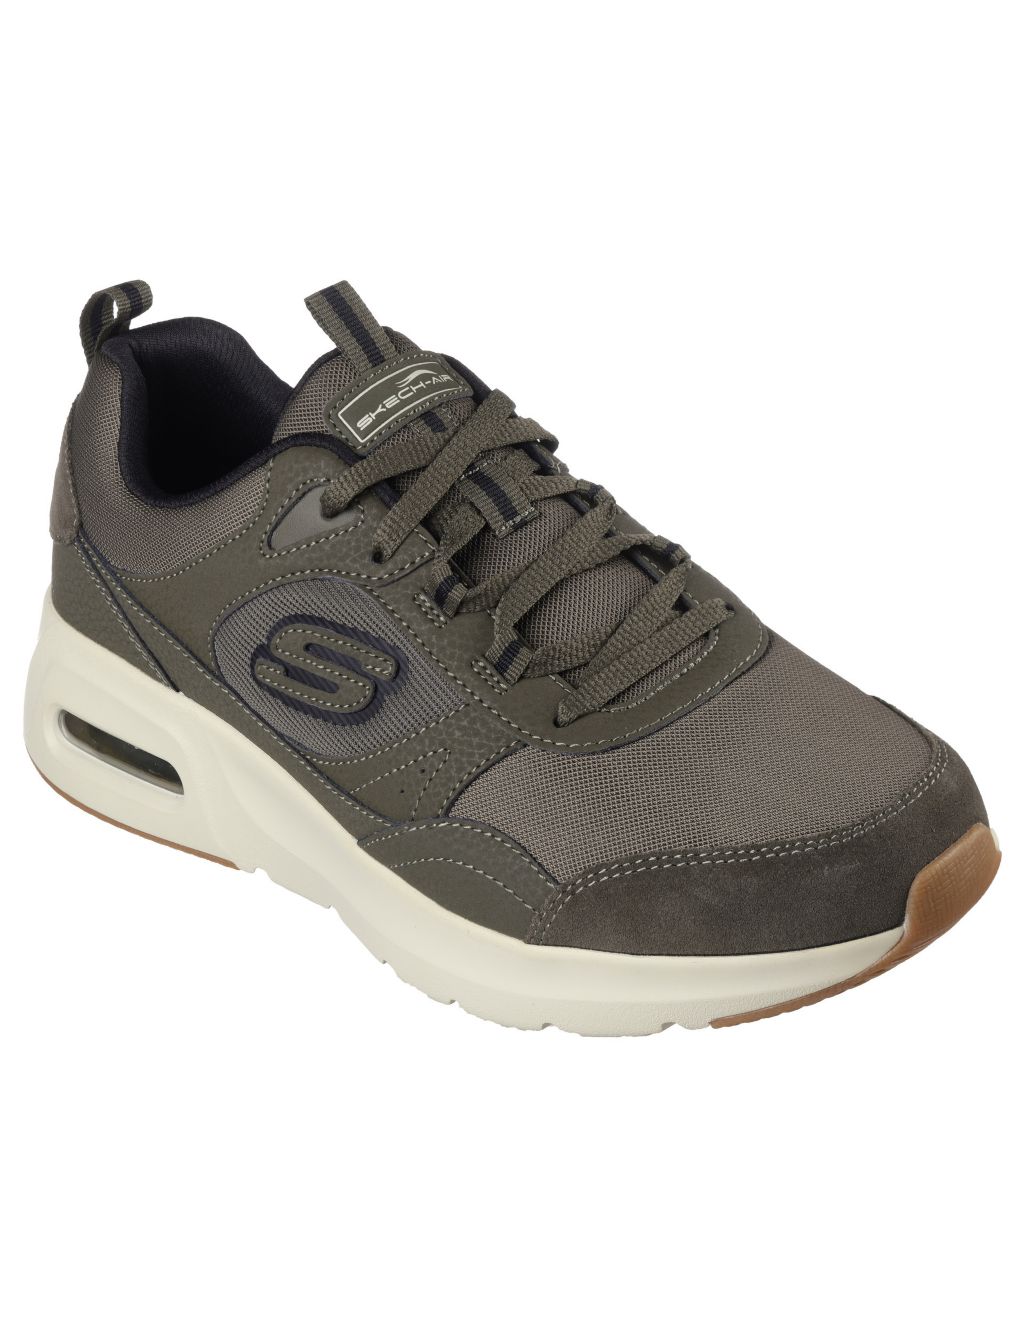 Skech-Air Court Homegrown Lace Up Trainers image 4